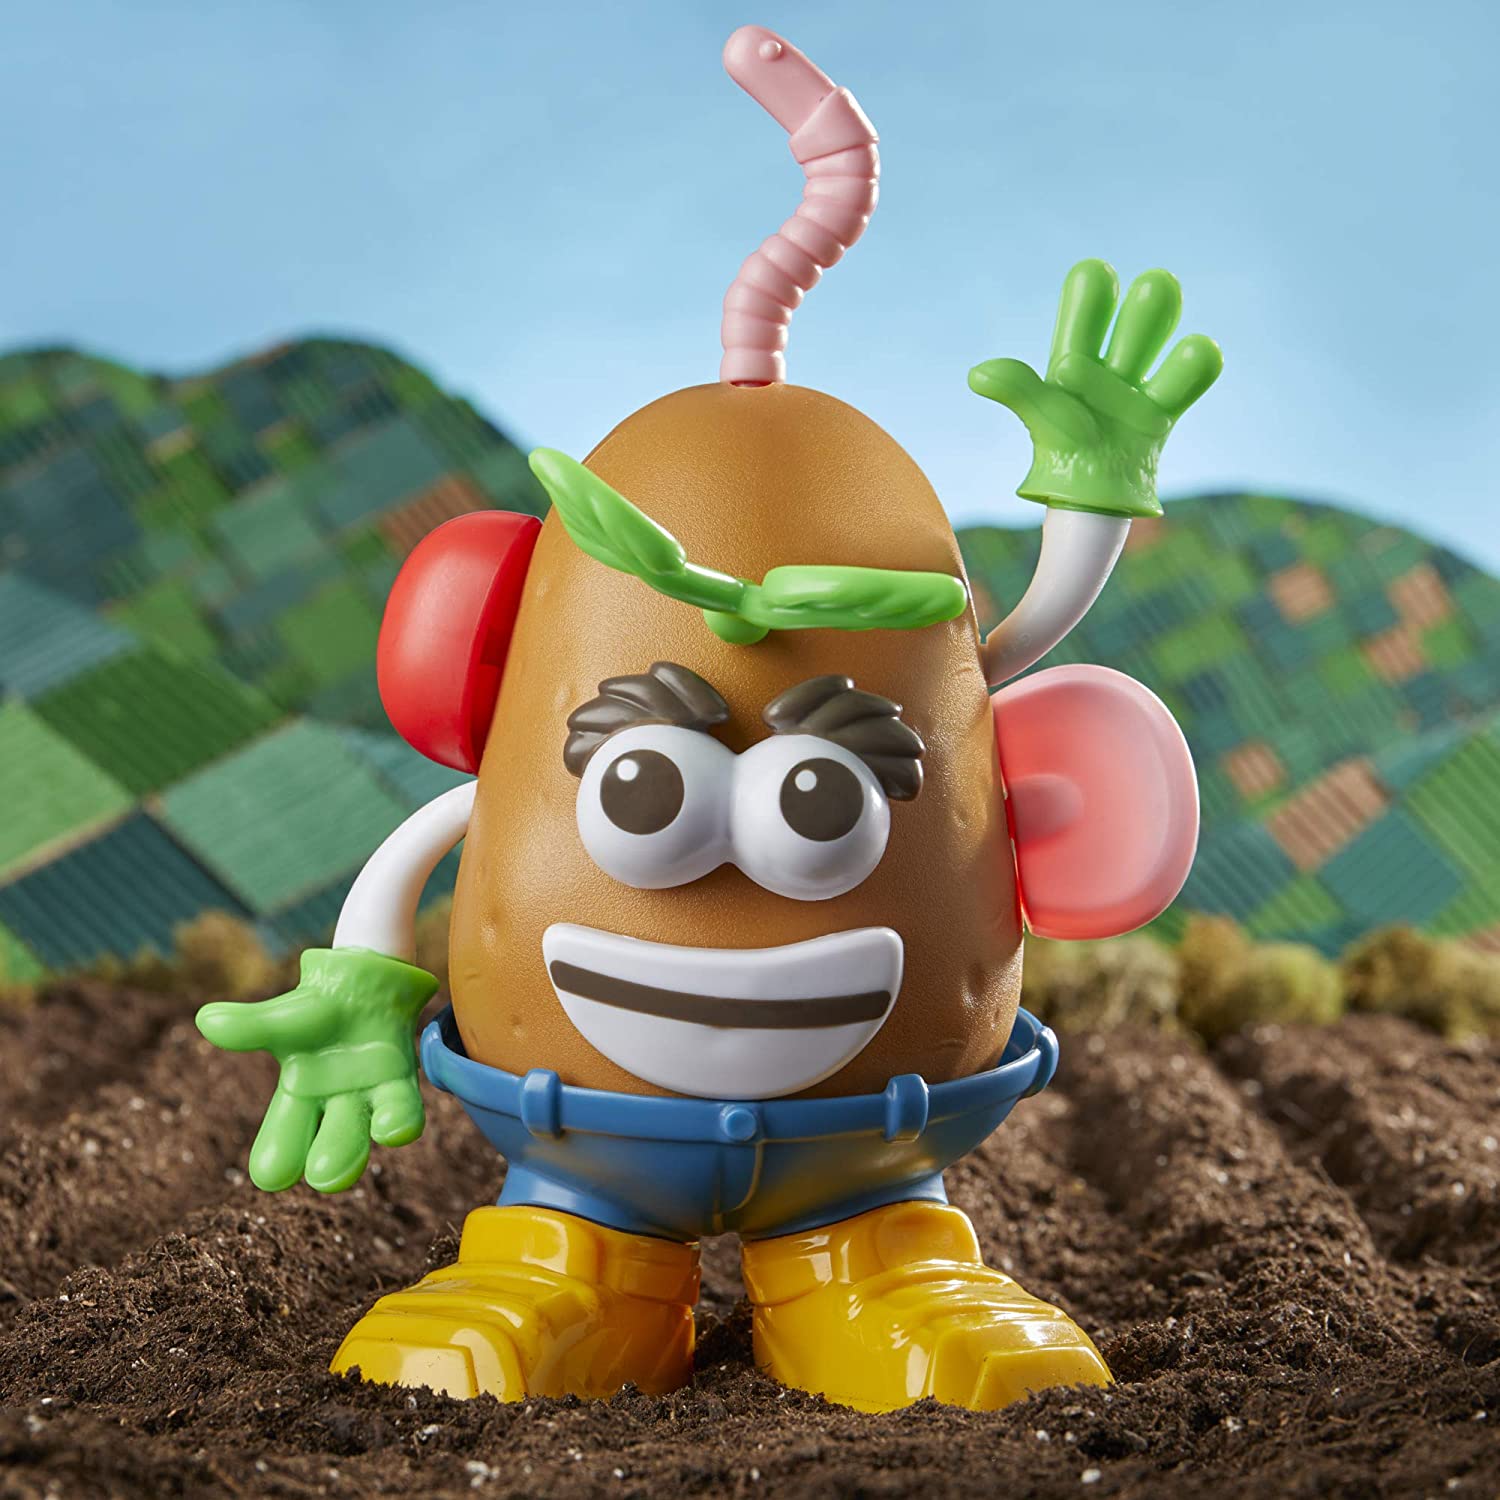 Mr Potato Head Goes Green Toy for Kids Ages 3 and up, Made with Plant-Based Plastic and FSC-Certified Paper Packaging - image 4 of 7